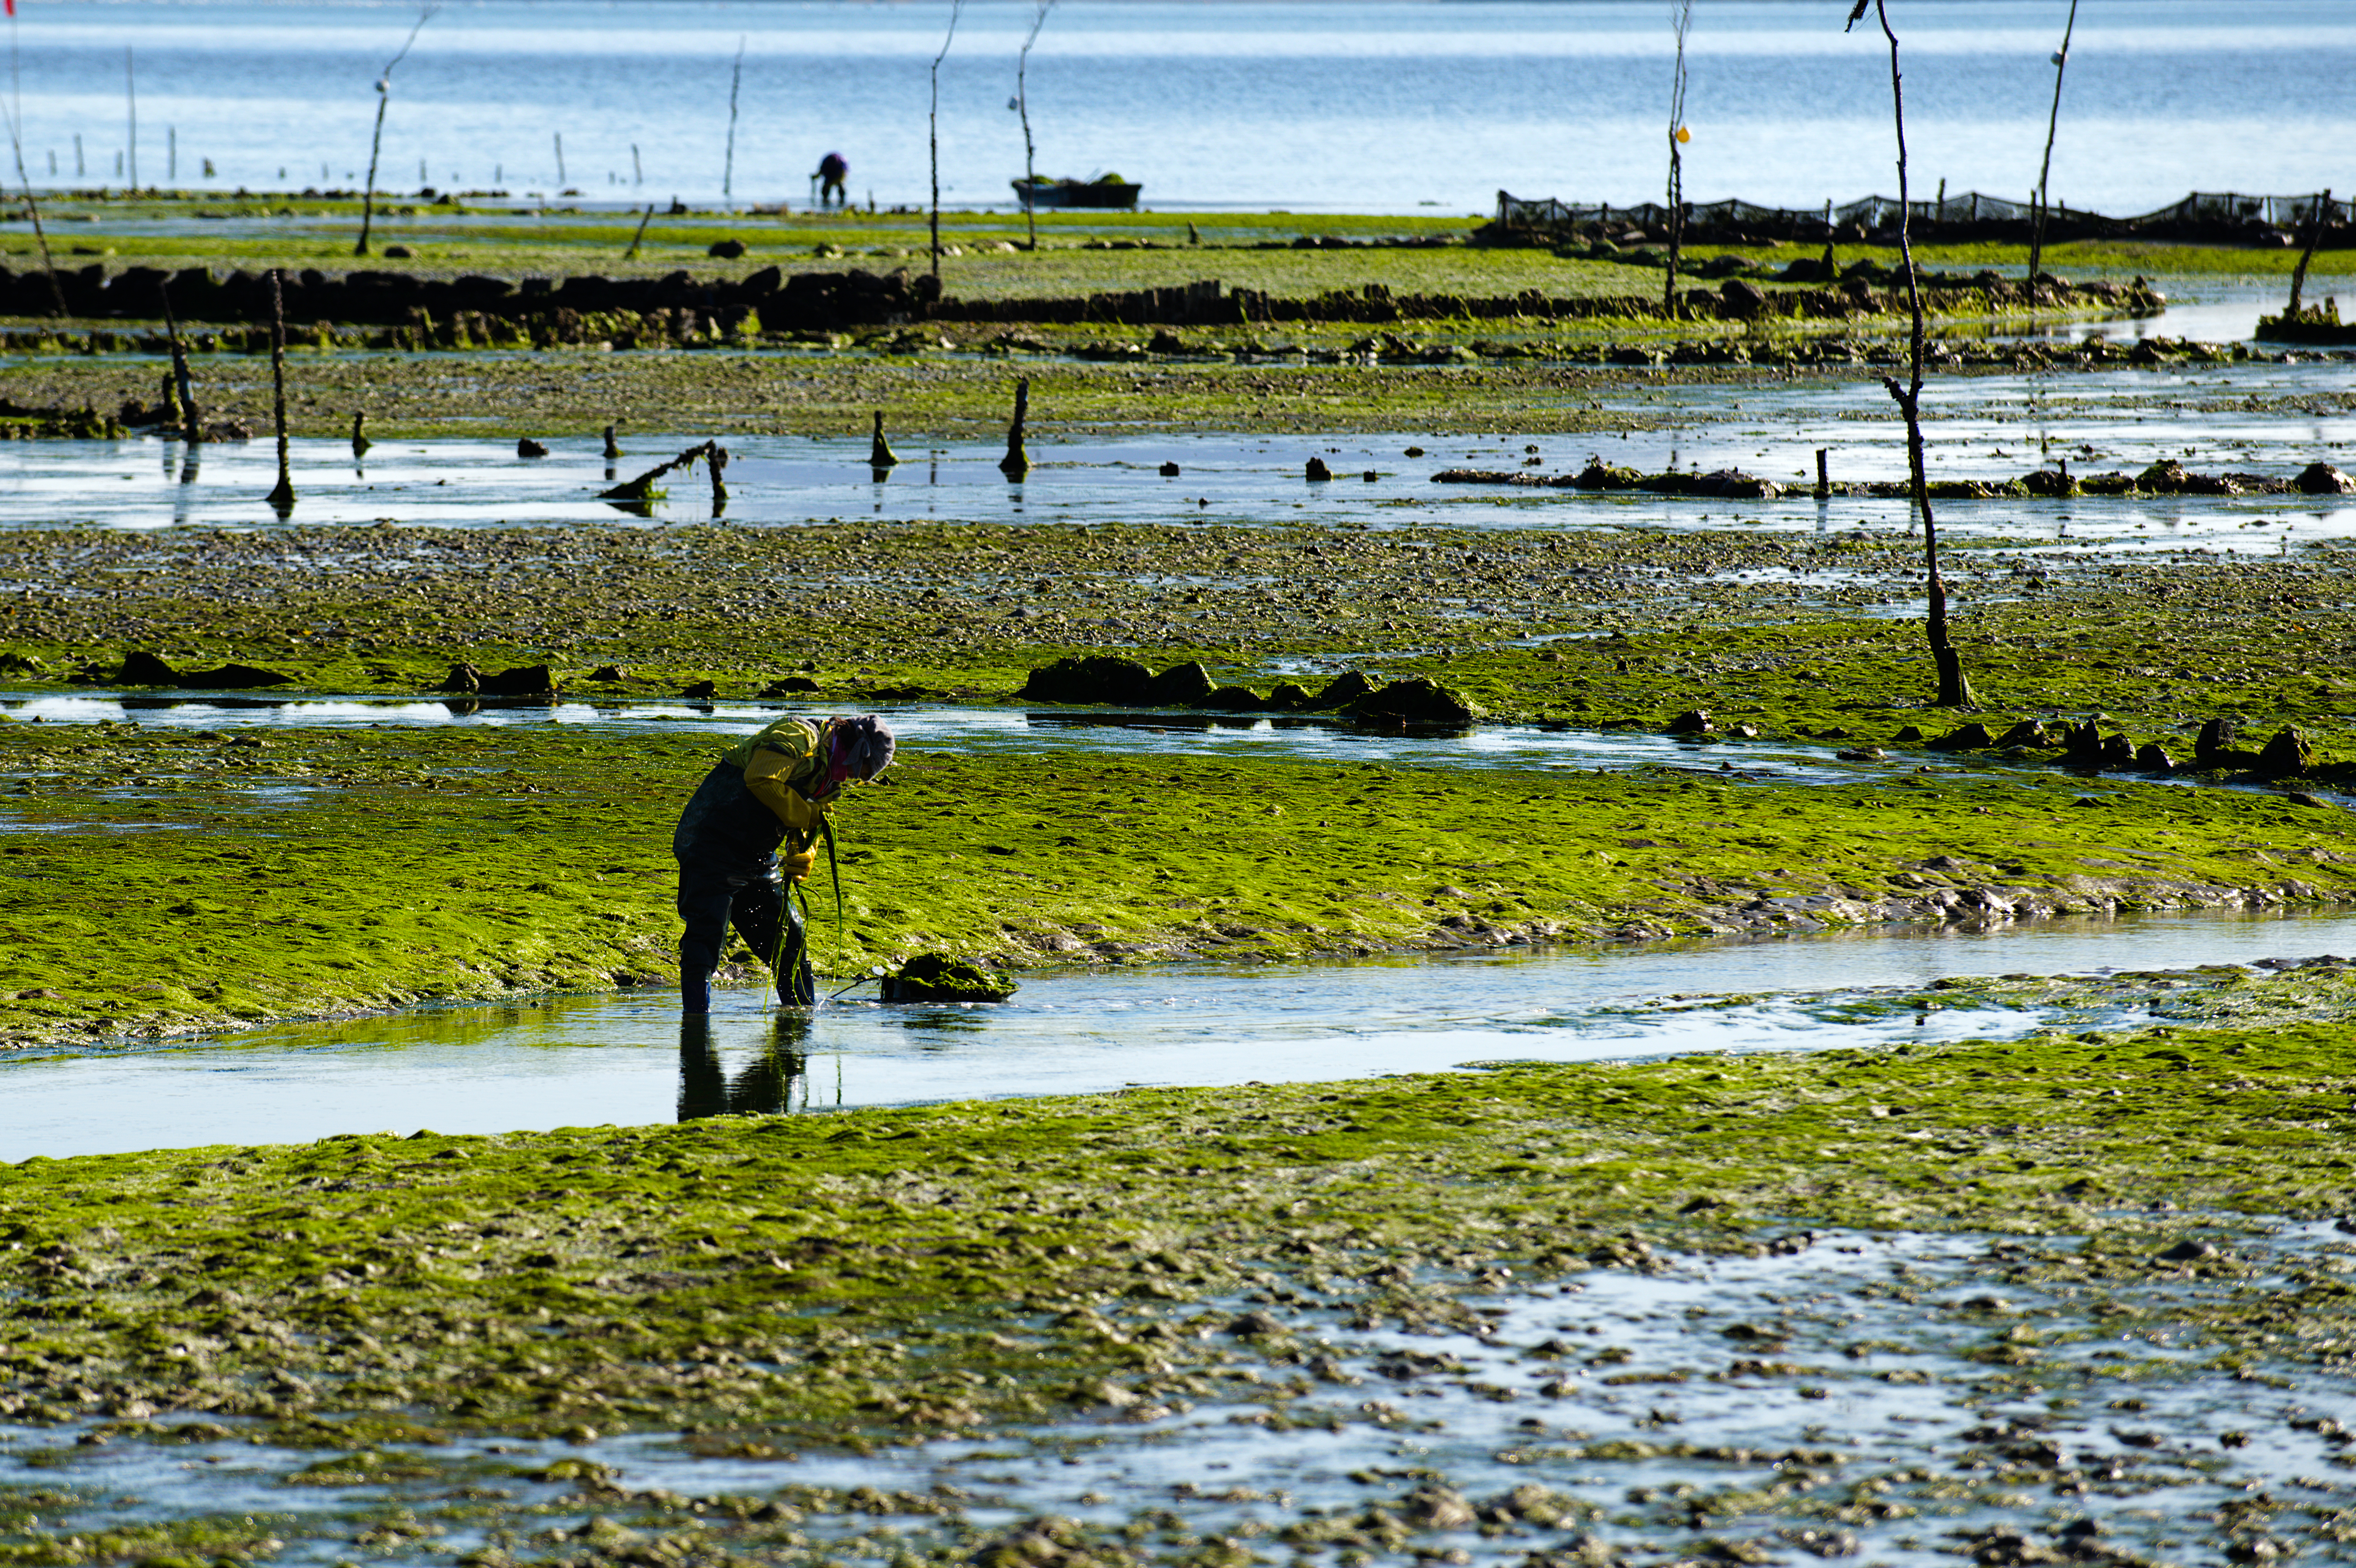 [Excellence Award] Cultivating sea lettuce1